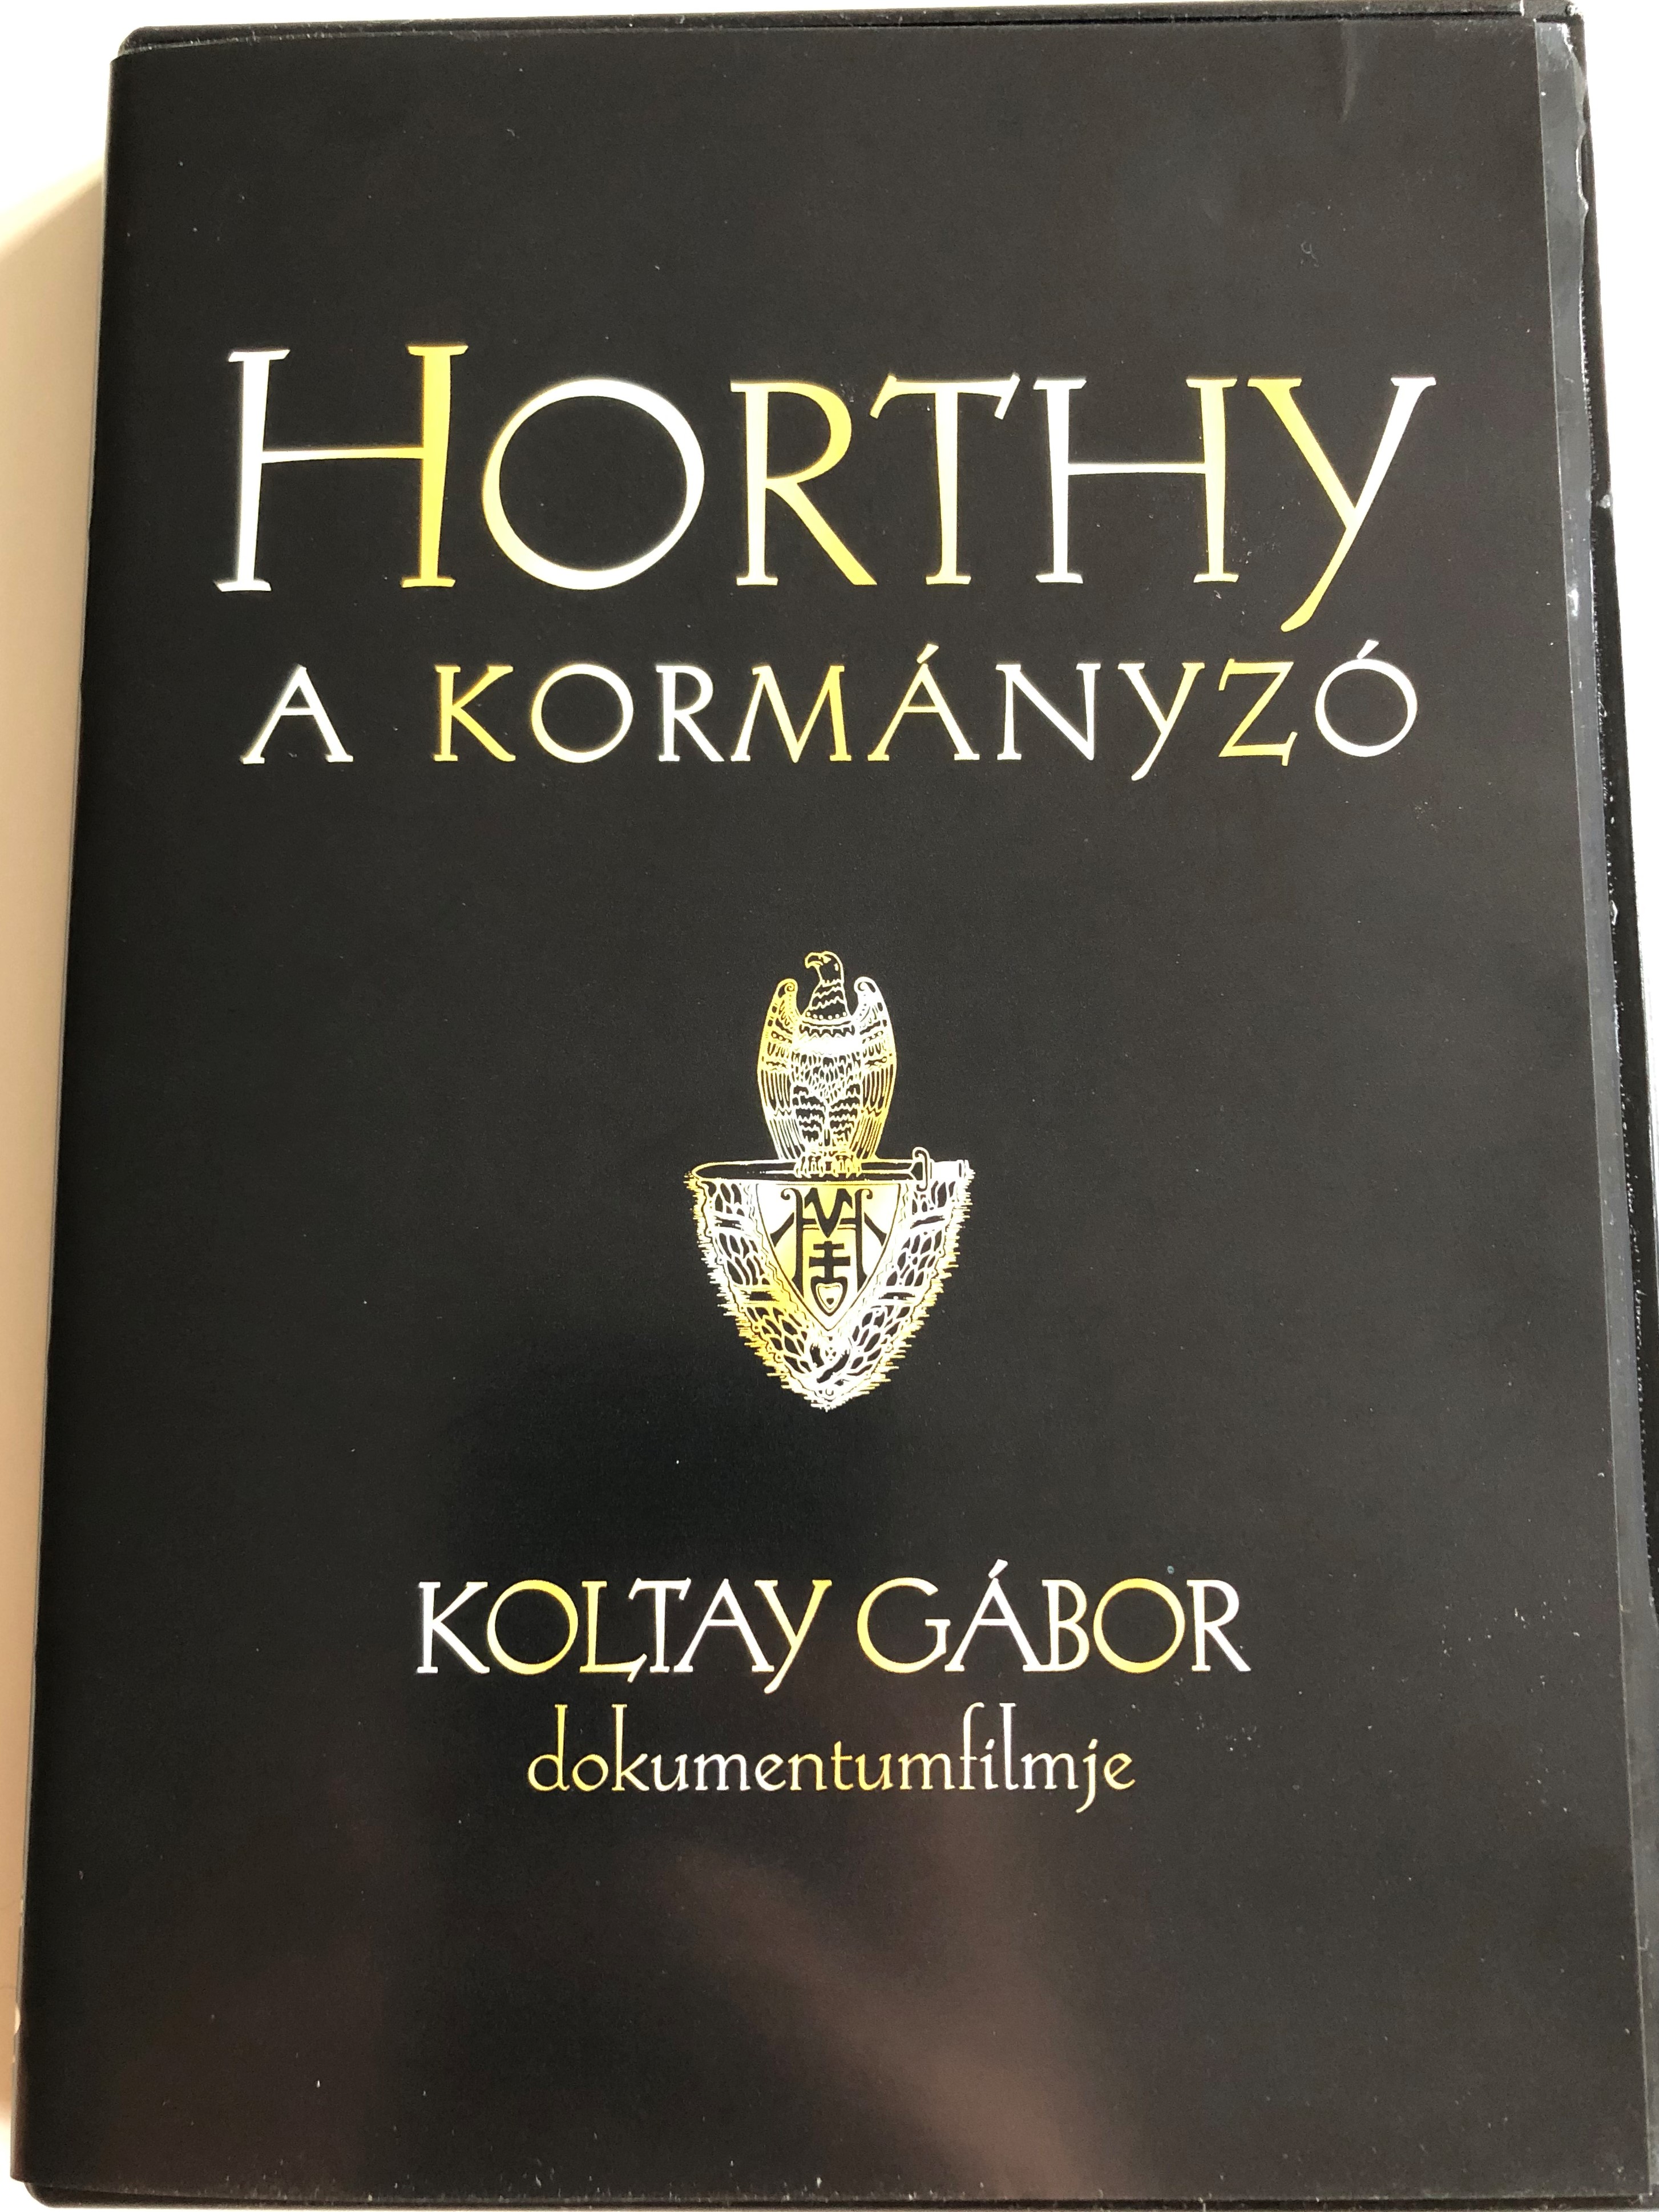 horthy-a-korm-nyz-dvd-2007-horthy-the-governor-directed-by-koltay-g-bor-featuring-sz-lyes-imre-csurka-l-szl-ferenczy-csongor-sipos-ron-sipos-imre-b-nffy-gy-rgy-1-.jpg